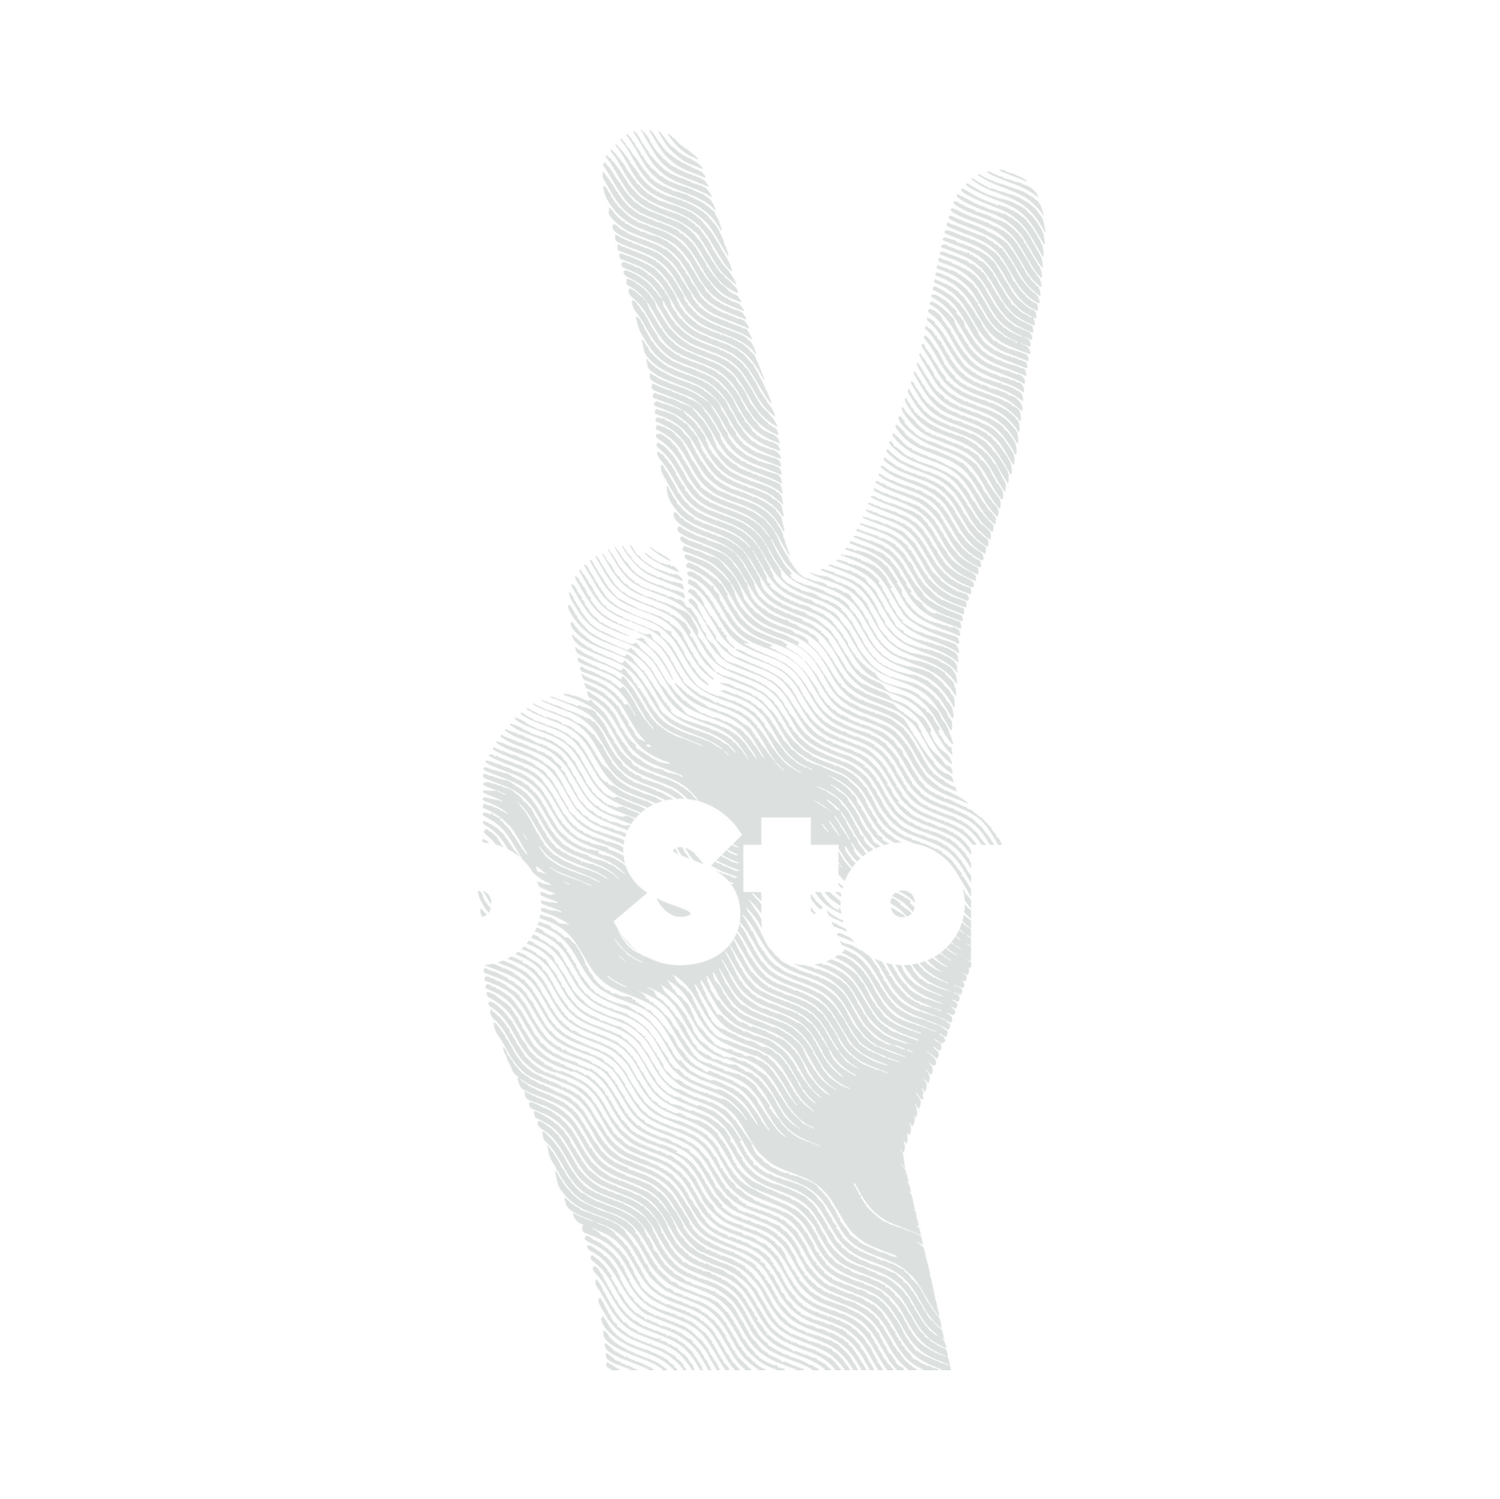 Two Stories Podcast